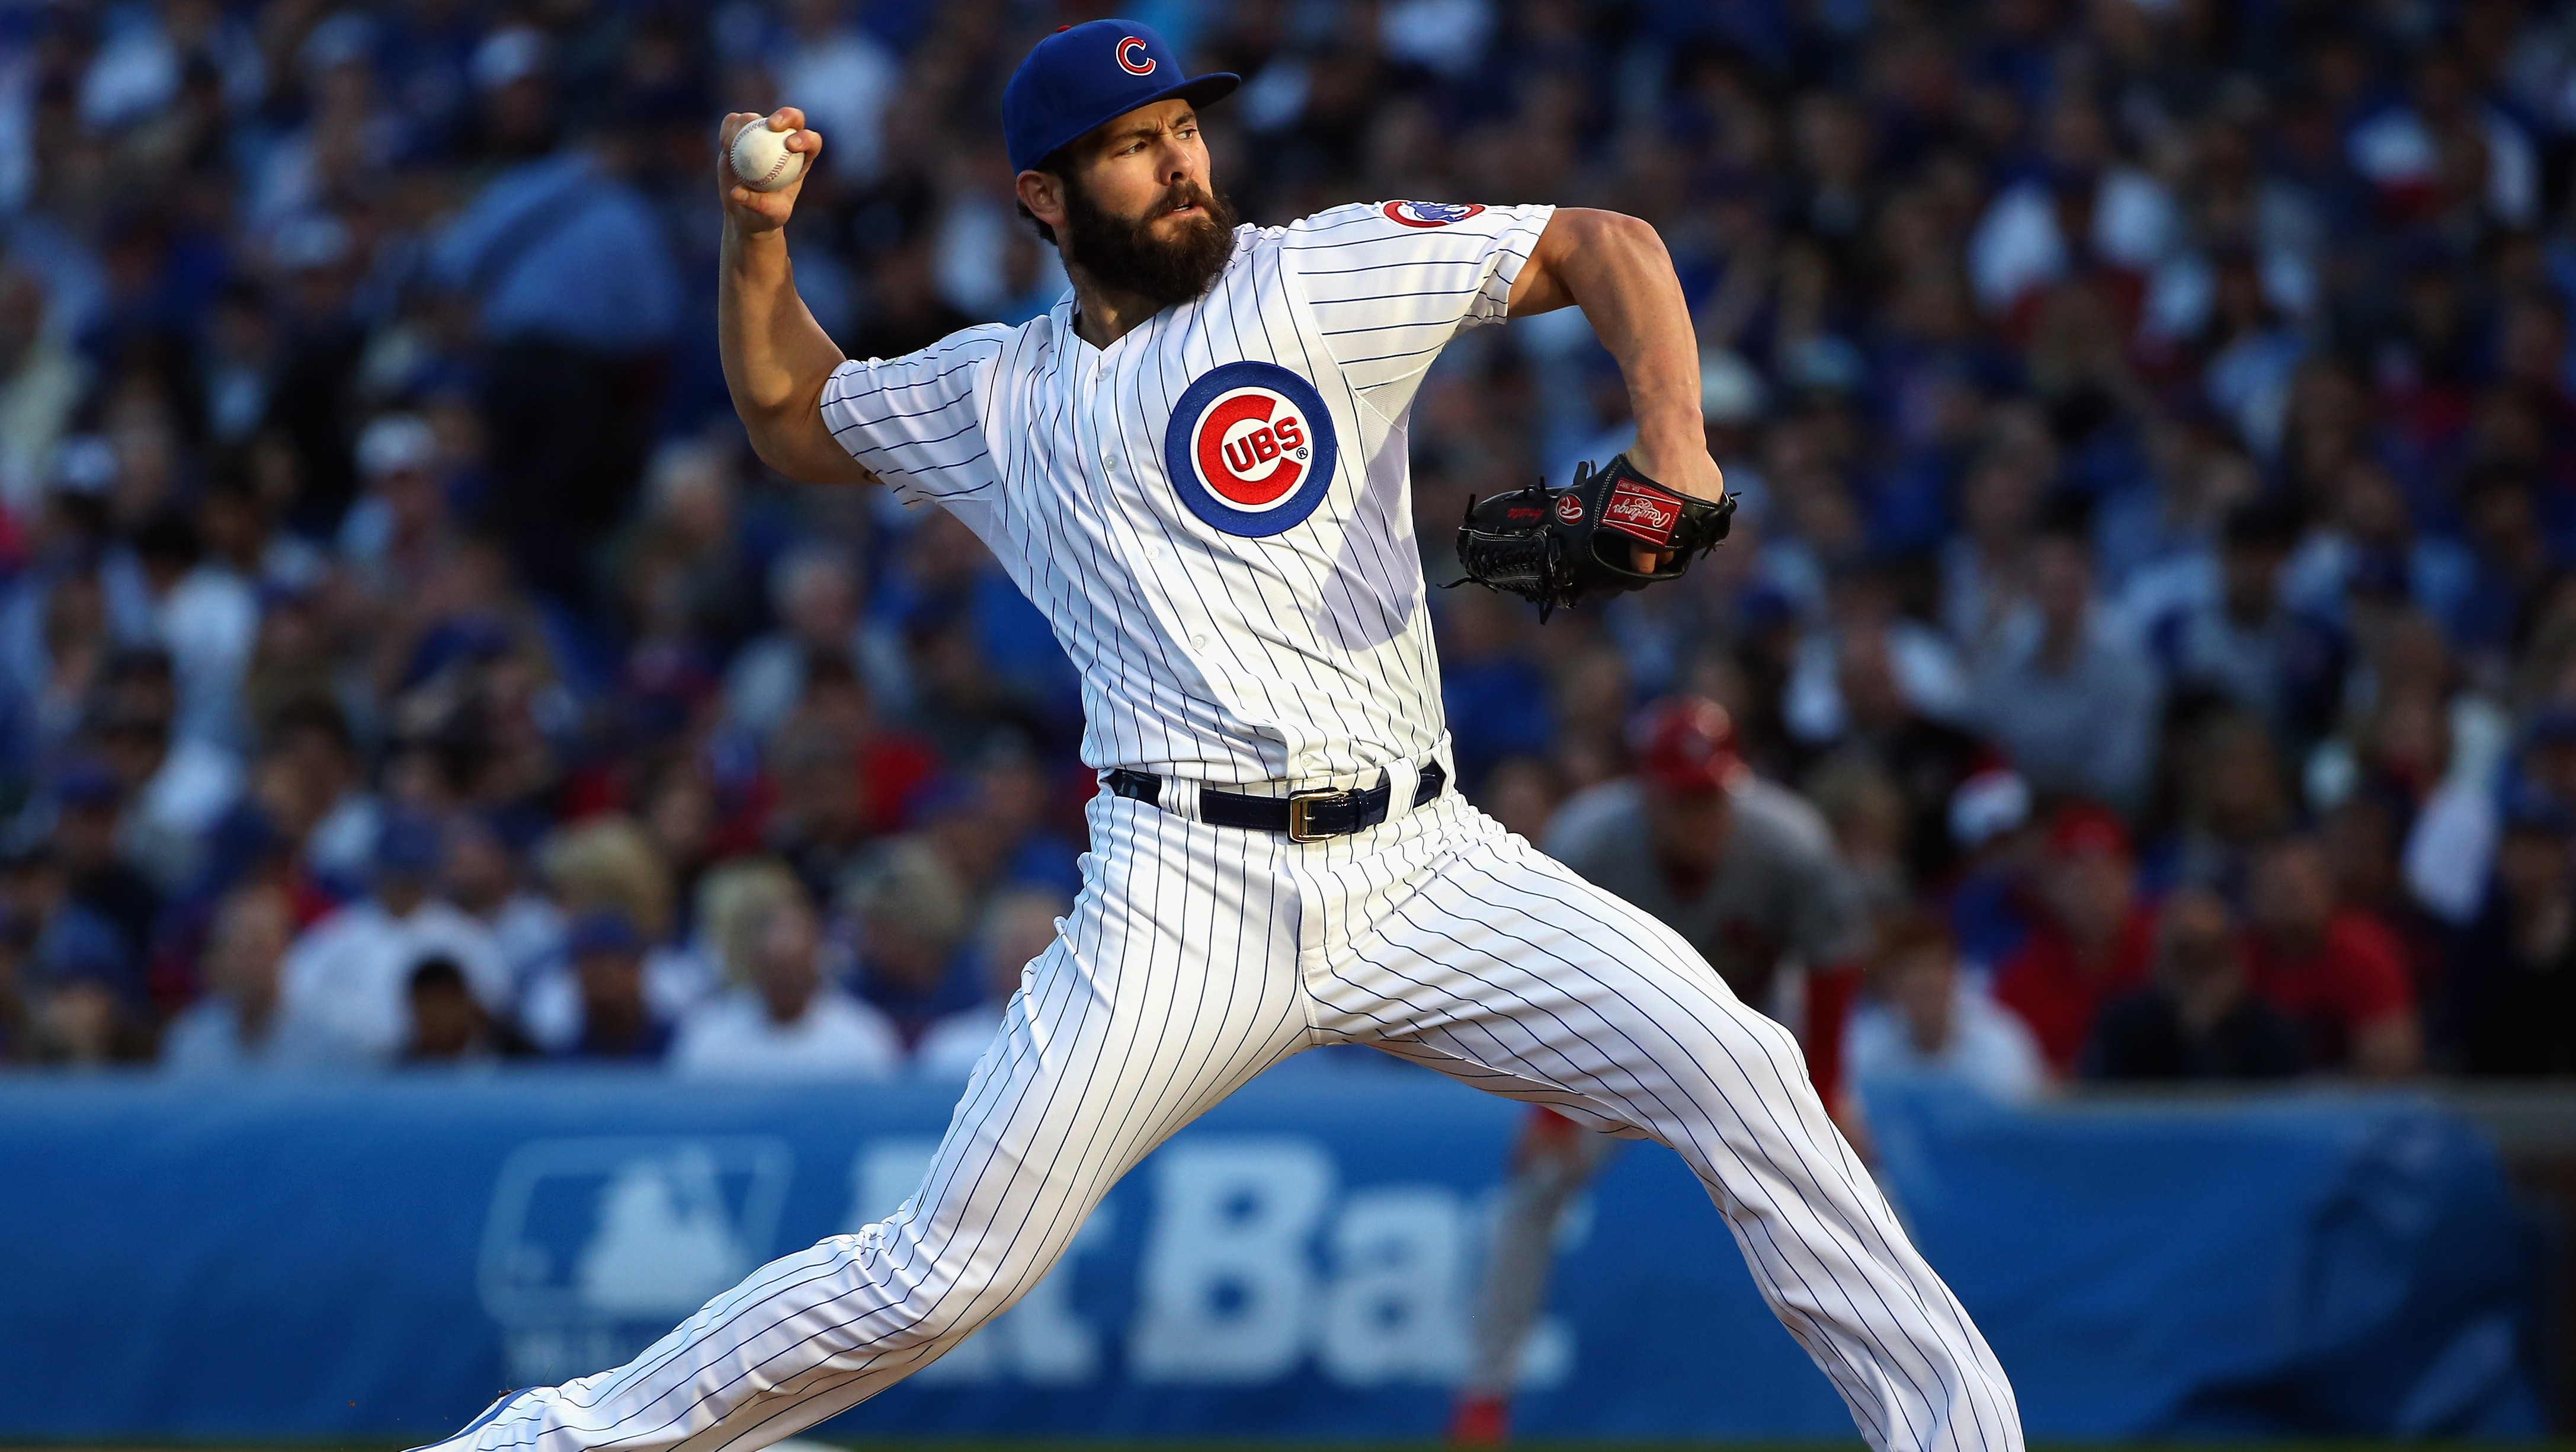 How to Watch Cubs vs. Mets Game 2 Live Online Free